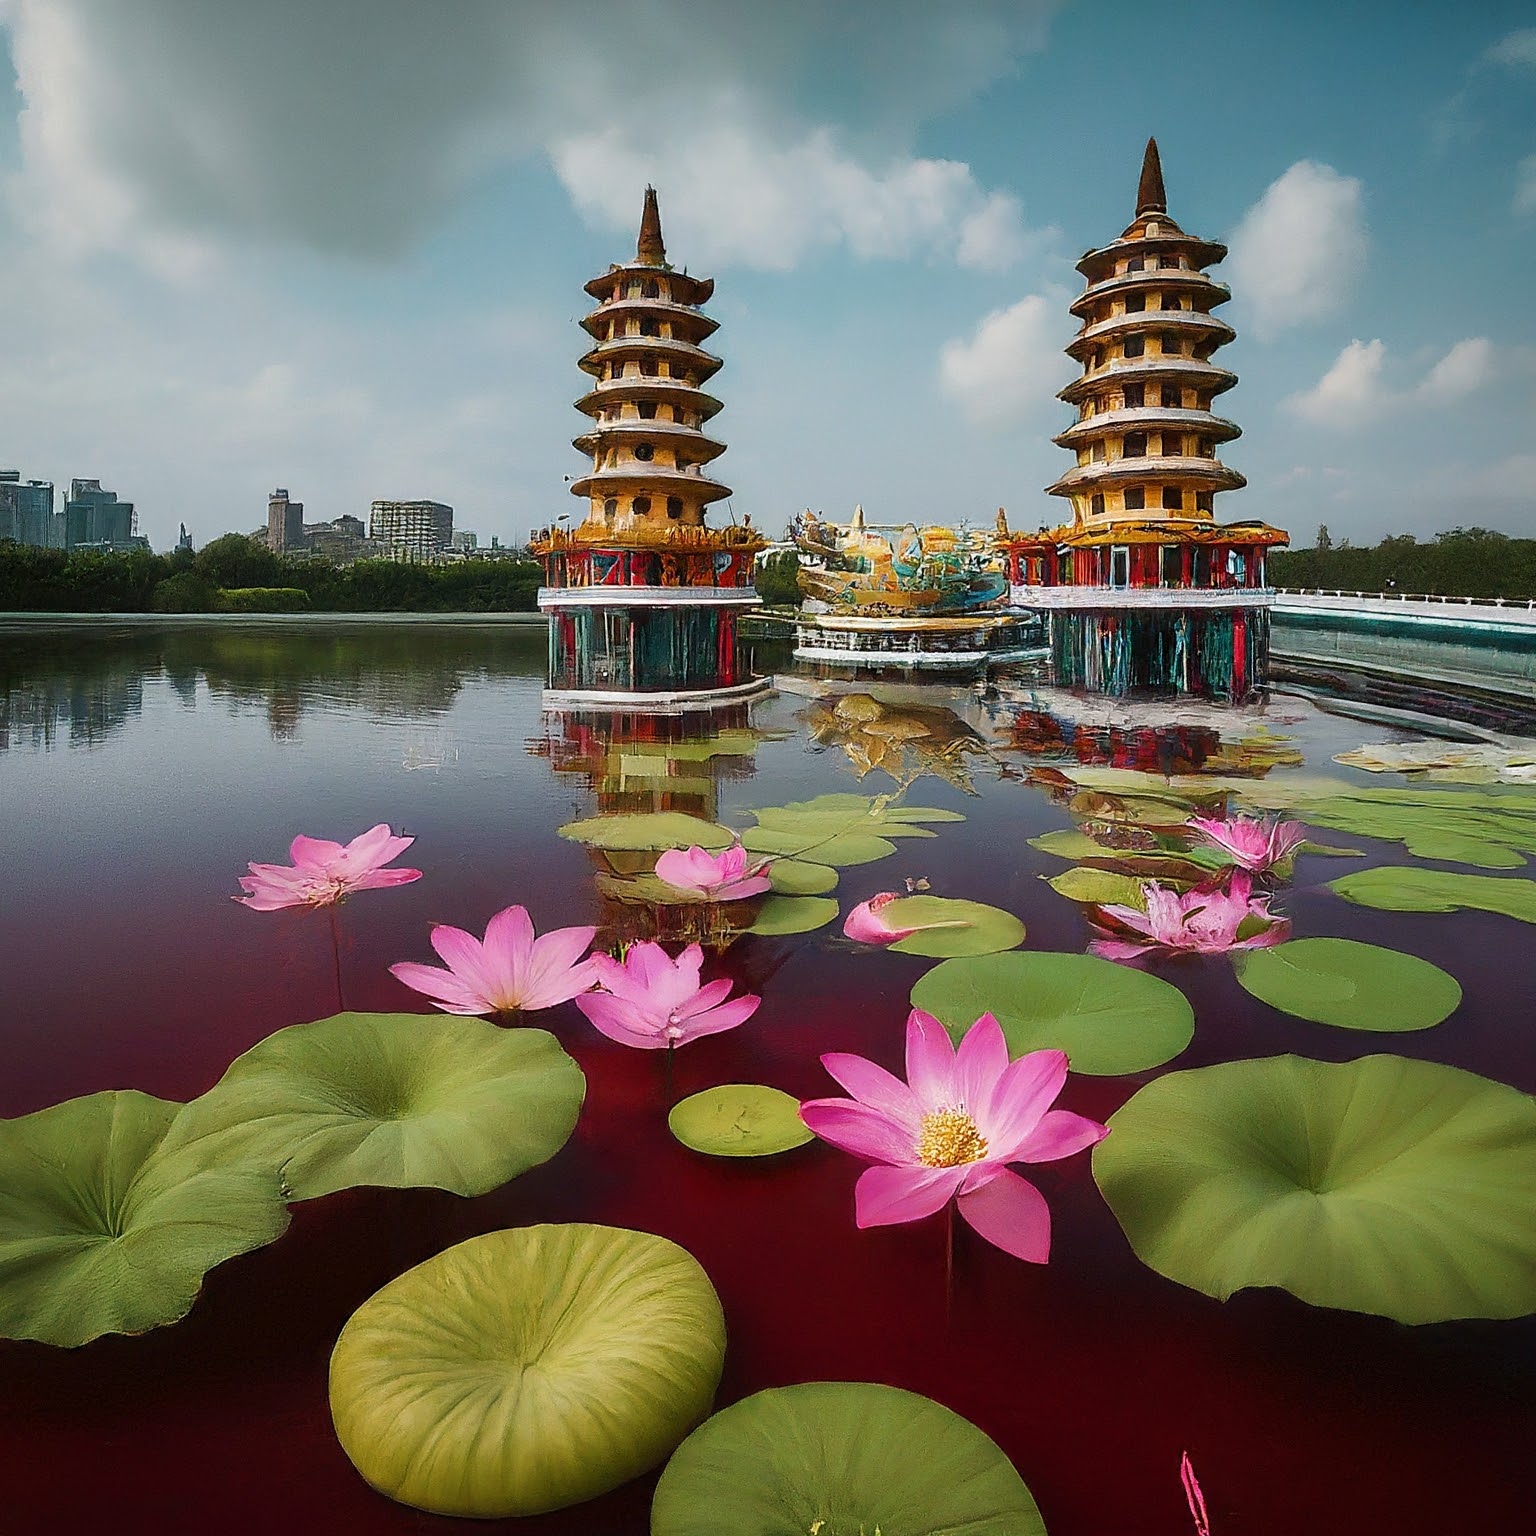 Kaohsiung Lotus Pond, Taiwan, with blooming lotus flowers, Dragon and Tiger Pagodas reflected in water.